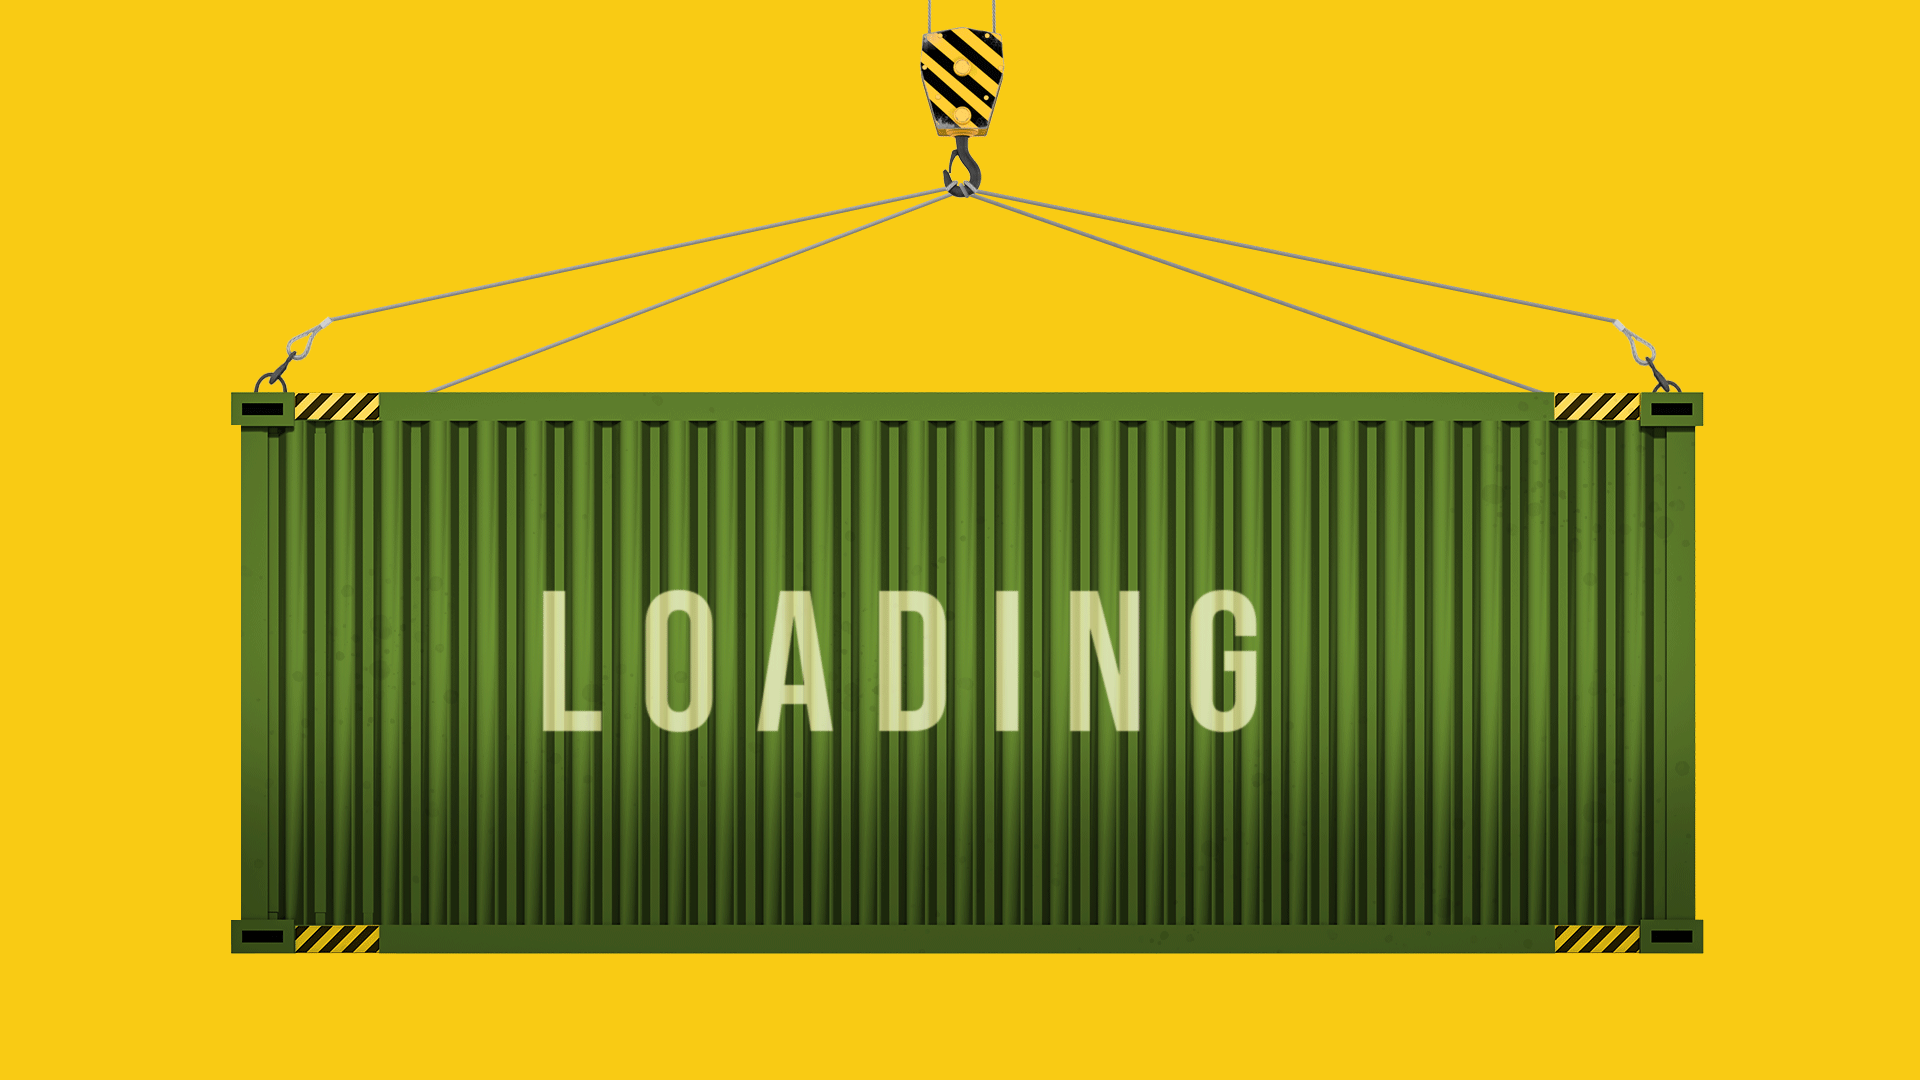 Animation of a shipping container with a loading screen on it